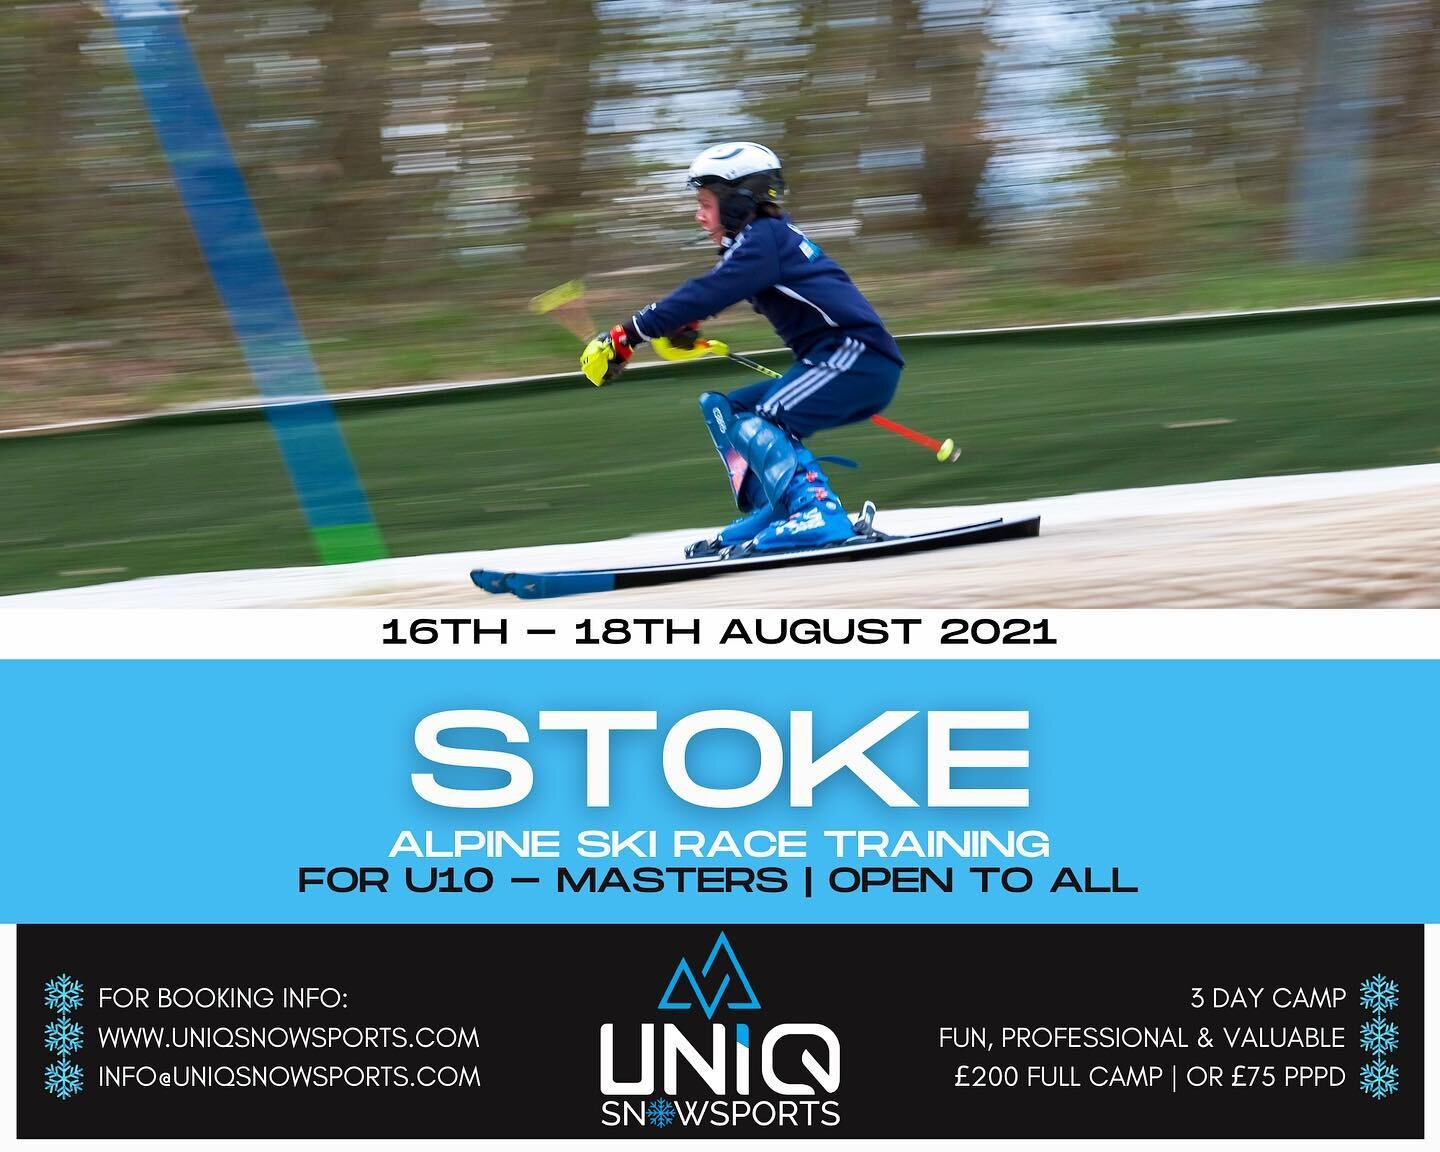 ❄️STOKE 16th - 18th August 2021🤘🏼

We are super excited to be running a Snowsports camp at this amazing UK facility! 

❄️Loads of room for drills
❄️Big start ramp for start training 
❄️Super grippy new matting 
❄️Professional coaching and instructi